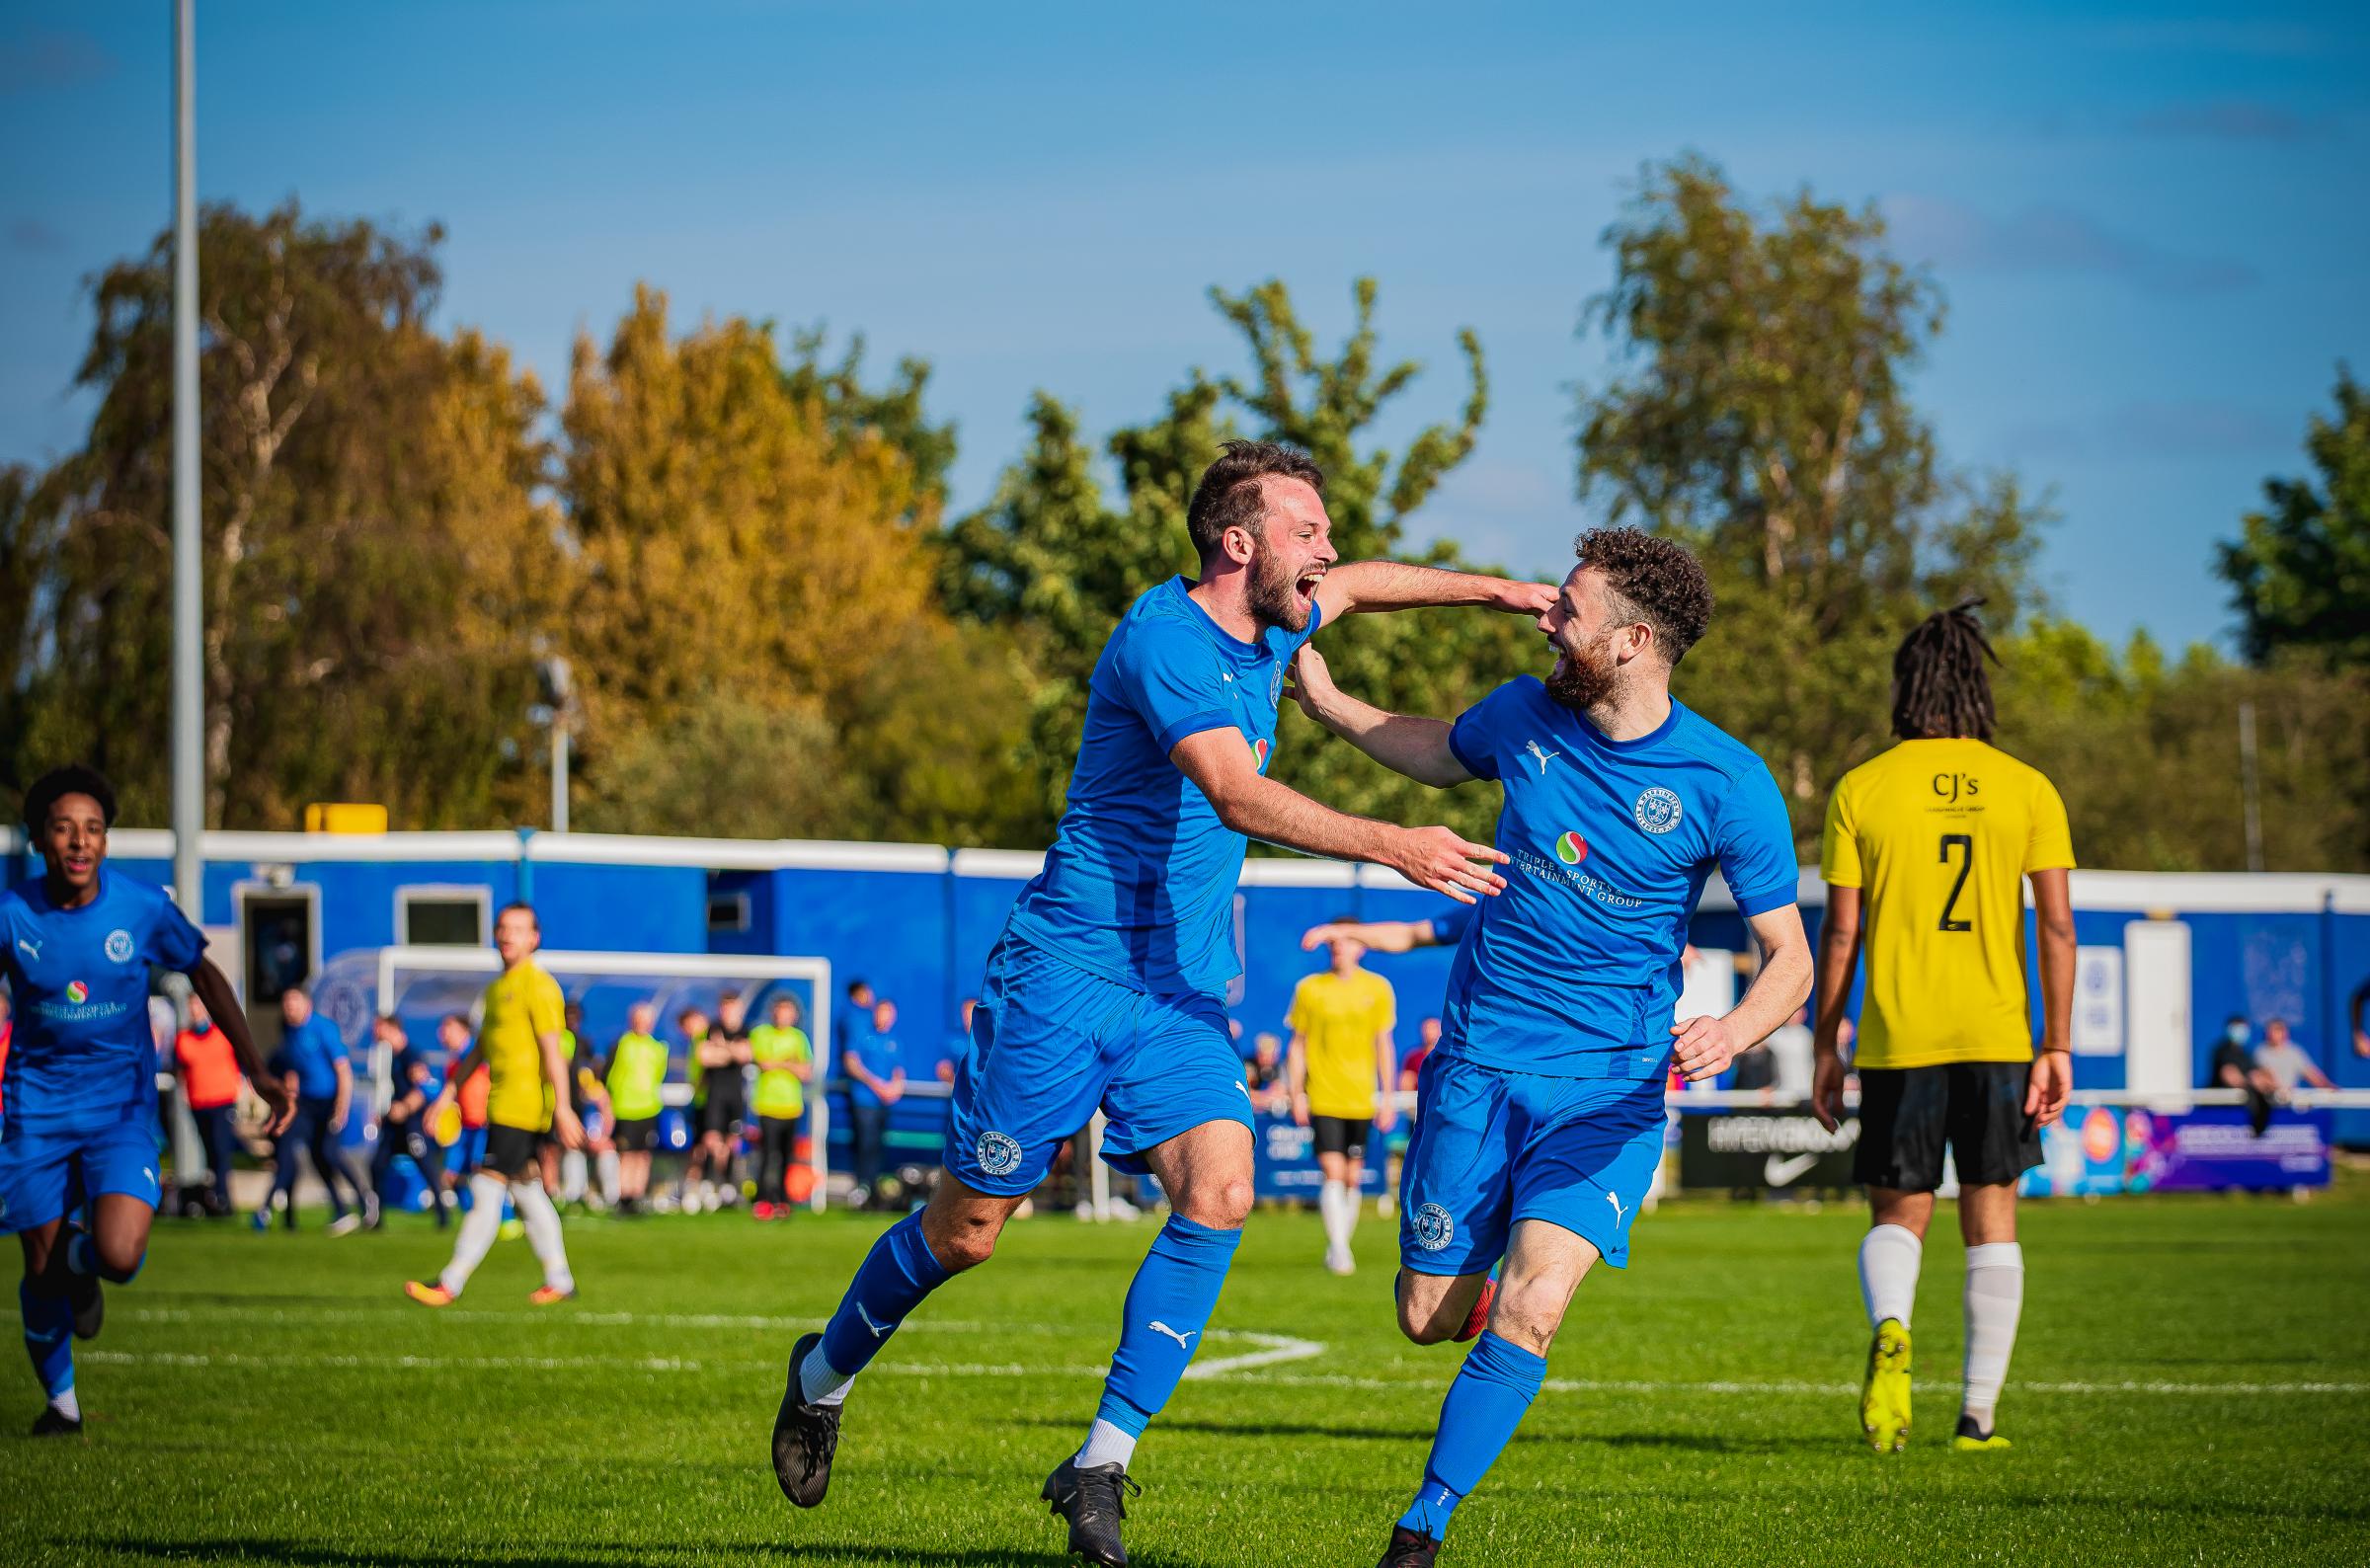 Warrington Rylands beat Clitheroe in the FA Cup last season. Ste Milne is pictured here celebrating the winning goal. Picture by Mark Percy